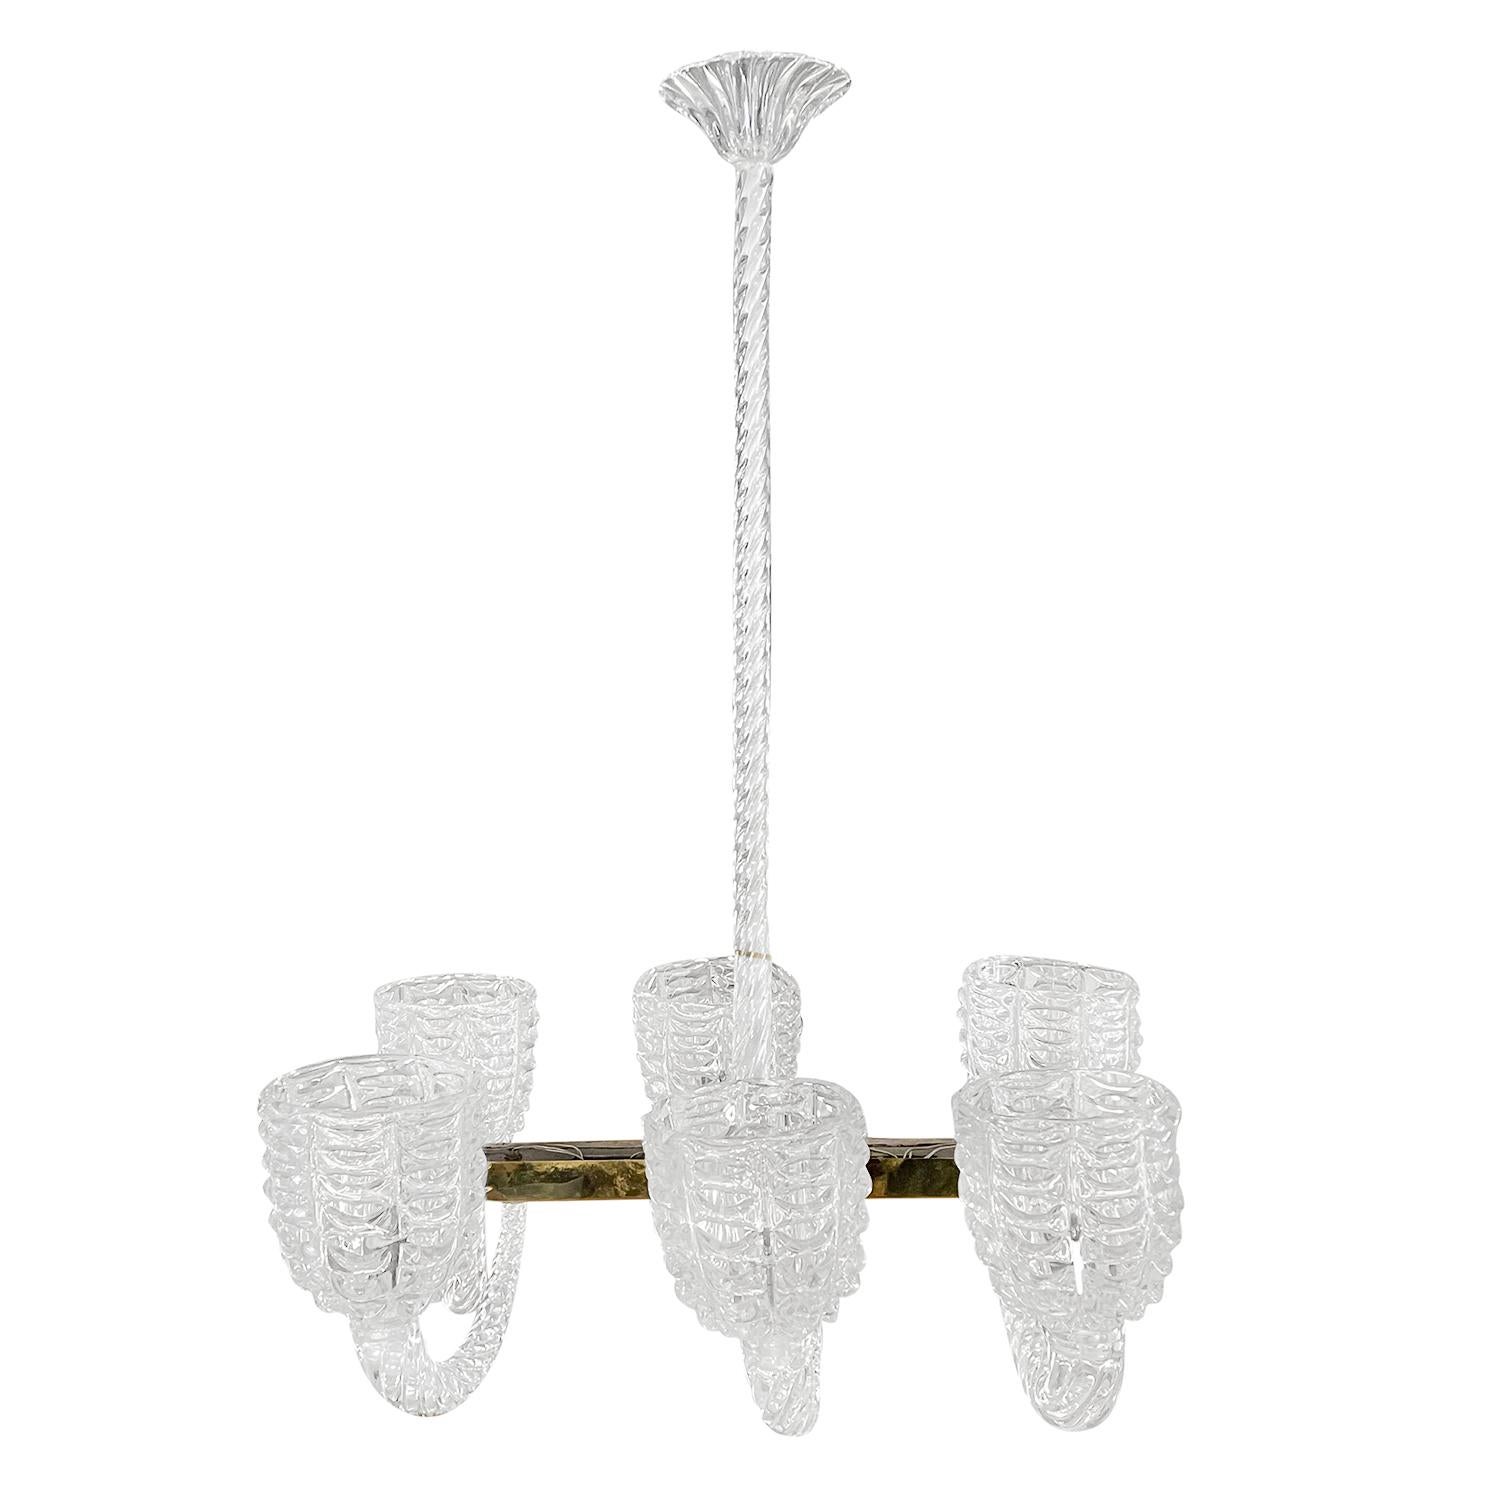 A vintage Mid-Century Modern Italian chandelier made of a rectangular brass base and hand blown Murano glass, designed by Ercole Barovier and produced by Barovier & Toso, in good condition. The pendant, ceiling light is composed with six round